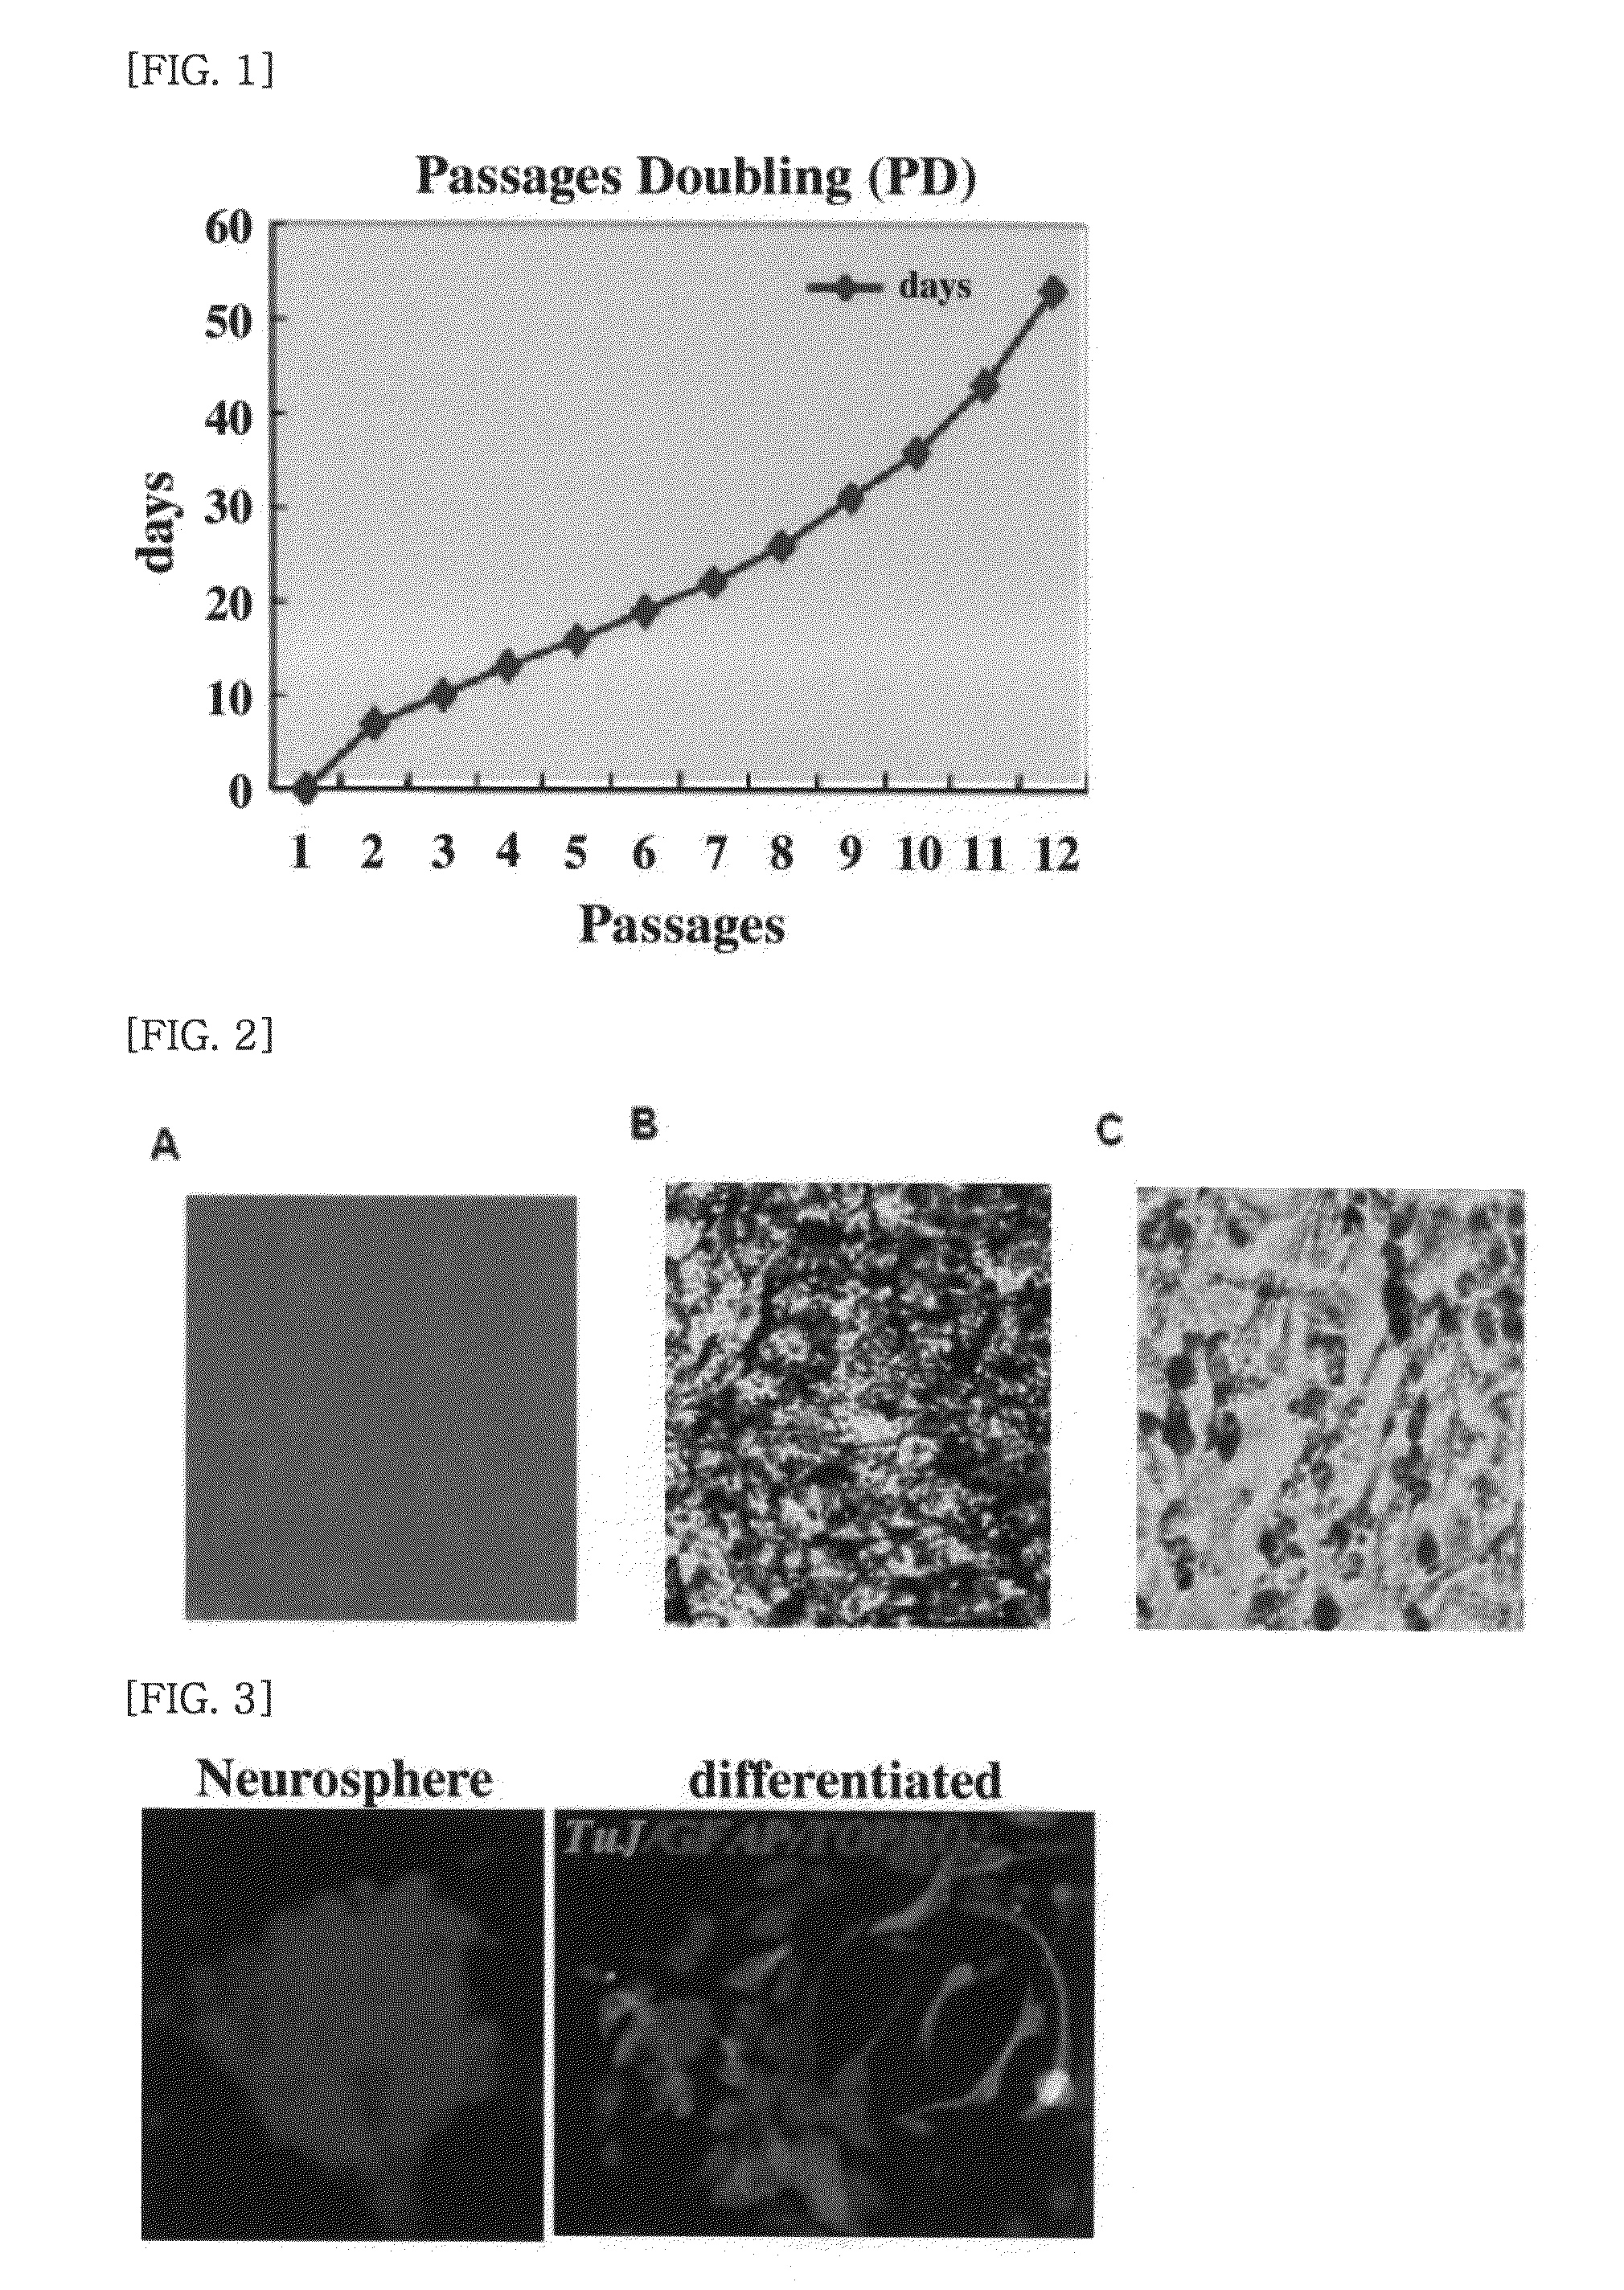 Therapeutic cell medicine comprising skin tissue derived stem cell